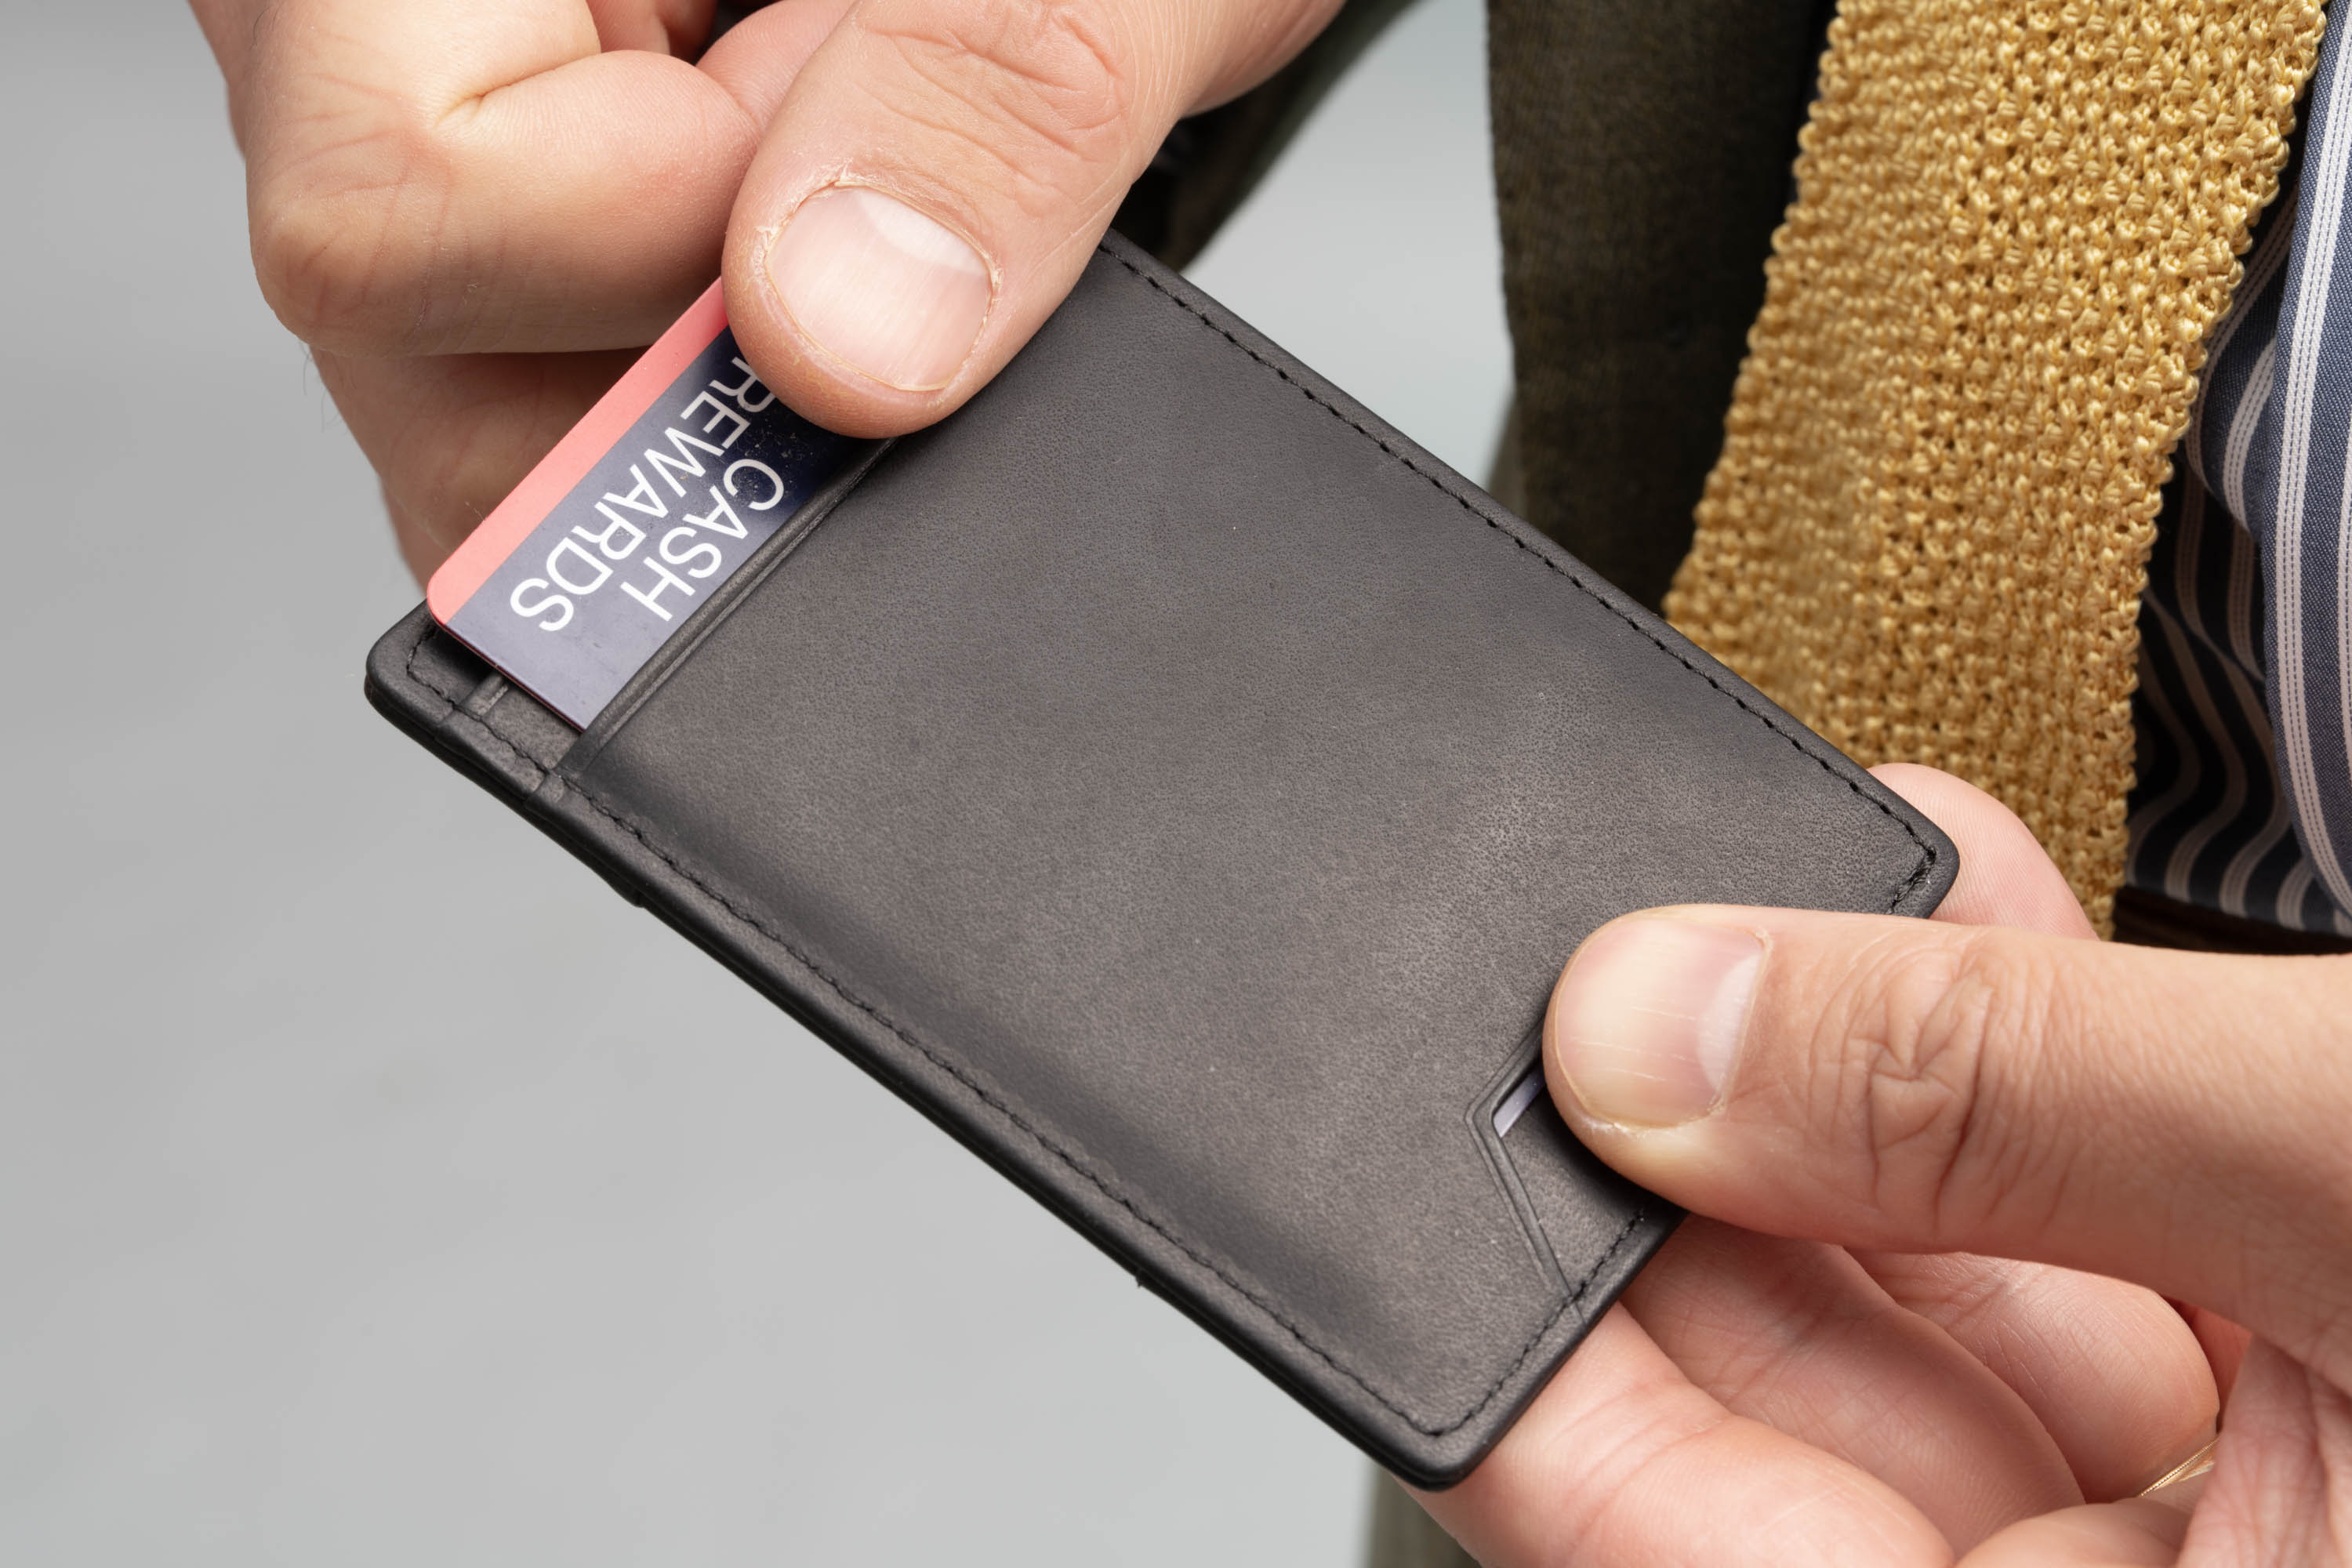 Slim Wallet - 4CC - Americana Black Full-Grain Leather comes with RFID blocking feature. 